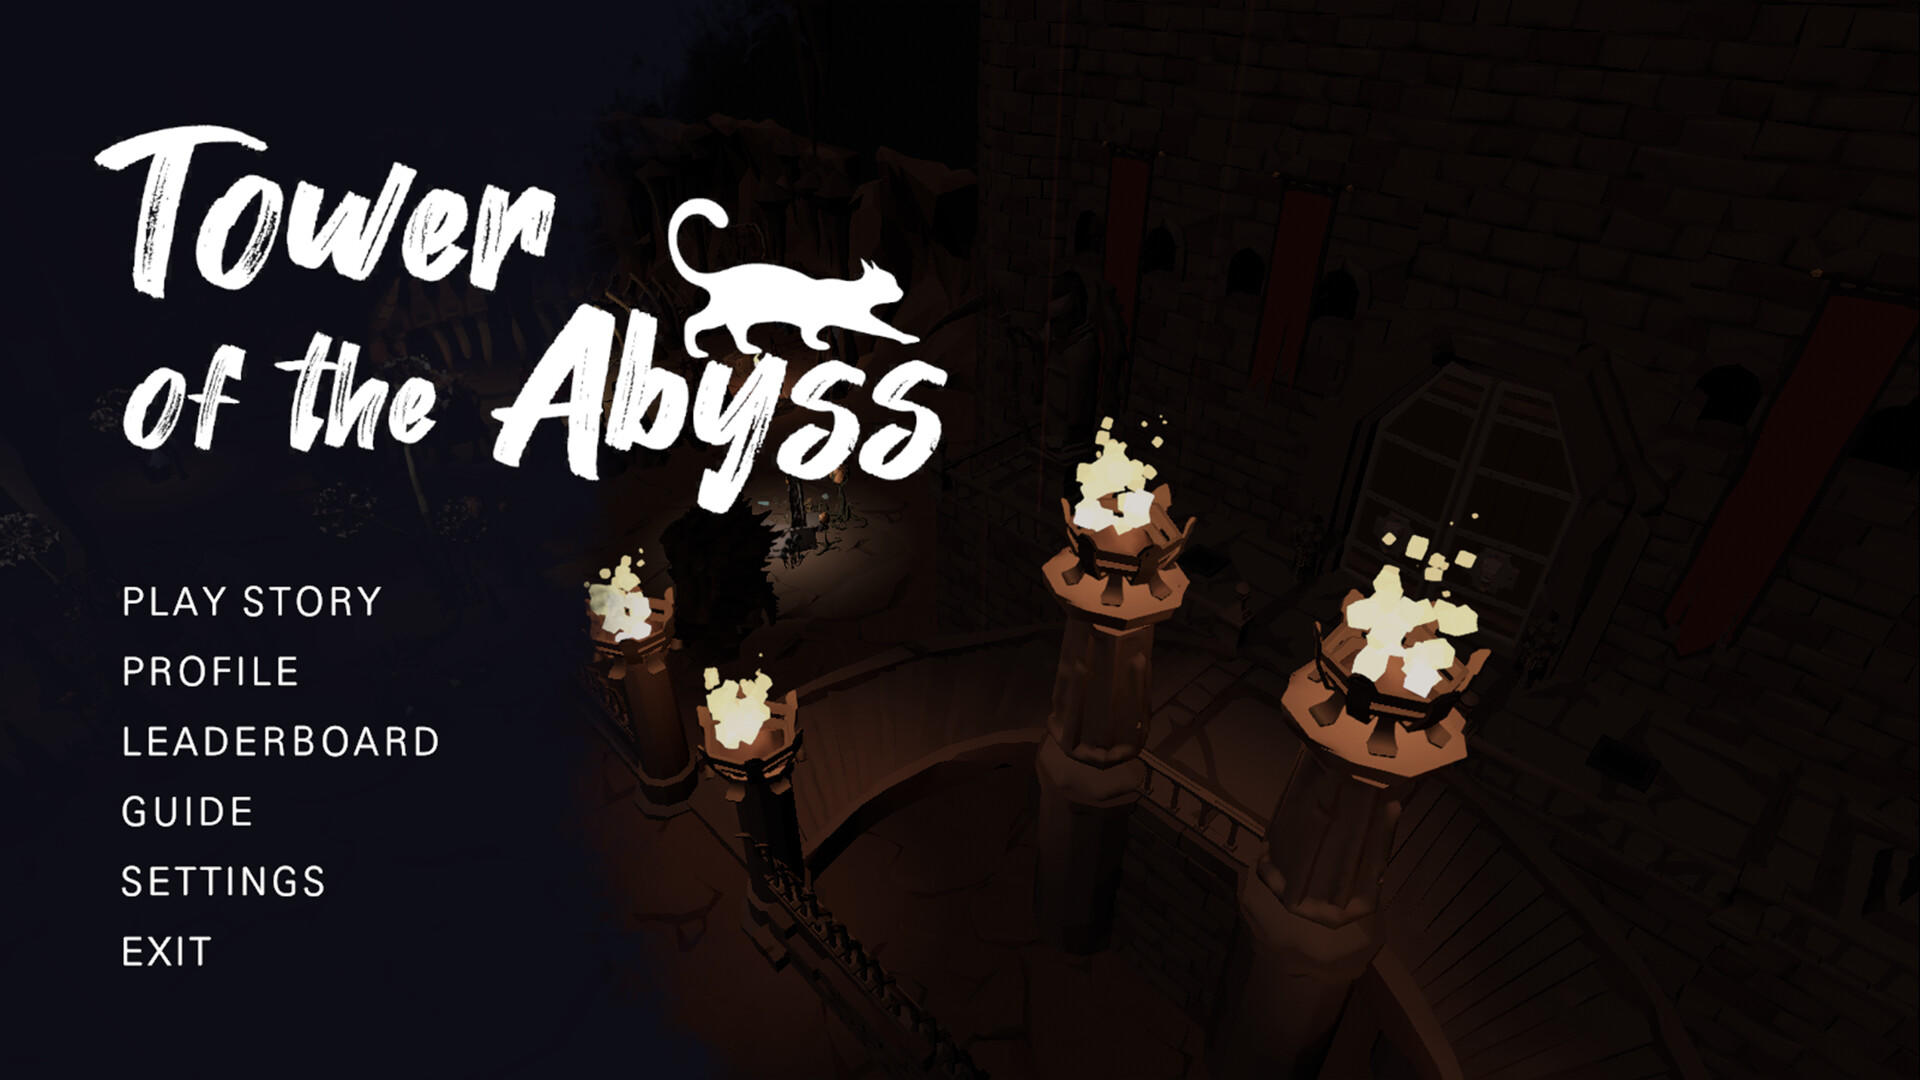 Tower of the abyss screenshot game